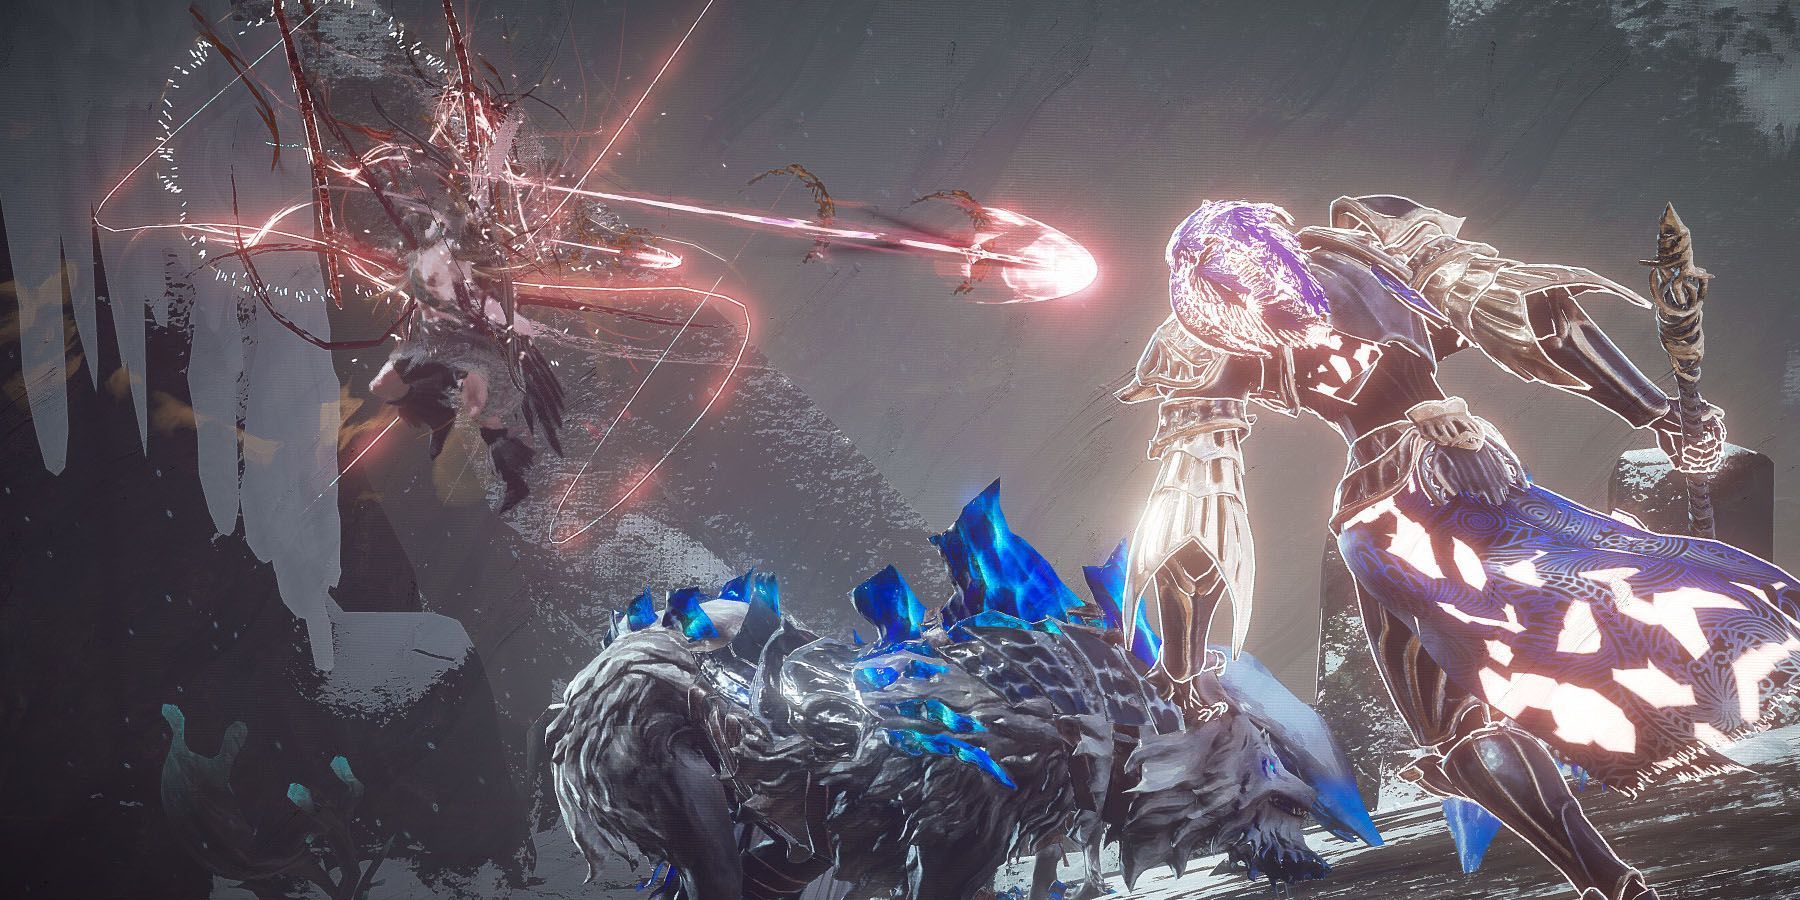 A promotional images for the PlatinumGames title Babylon's Fall.